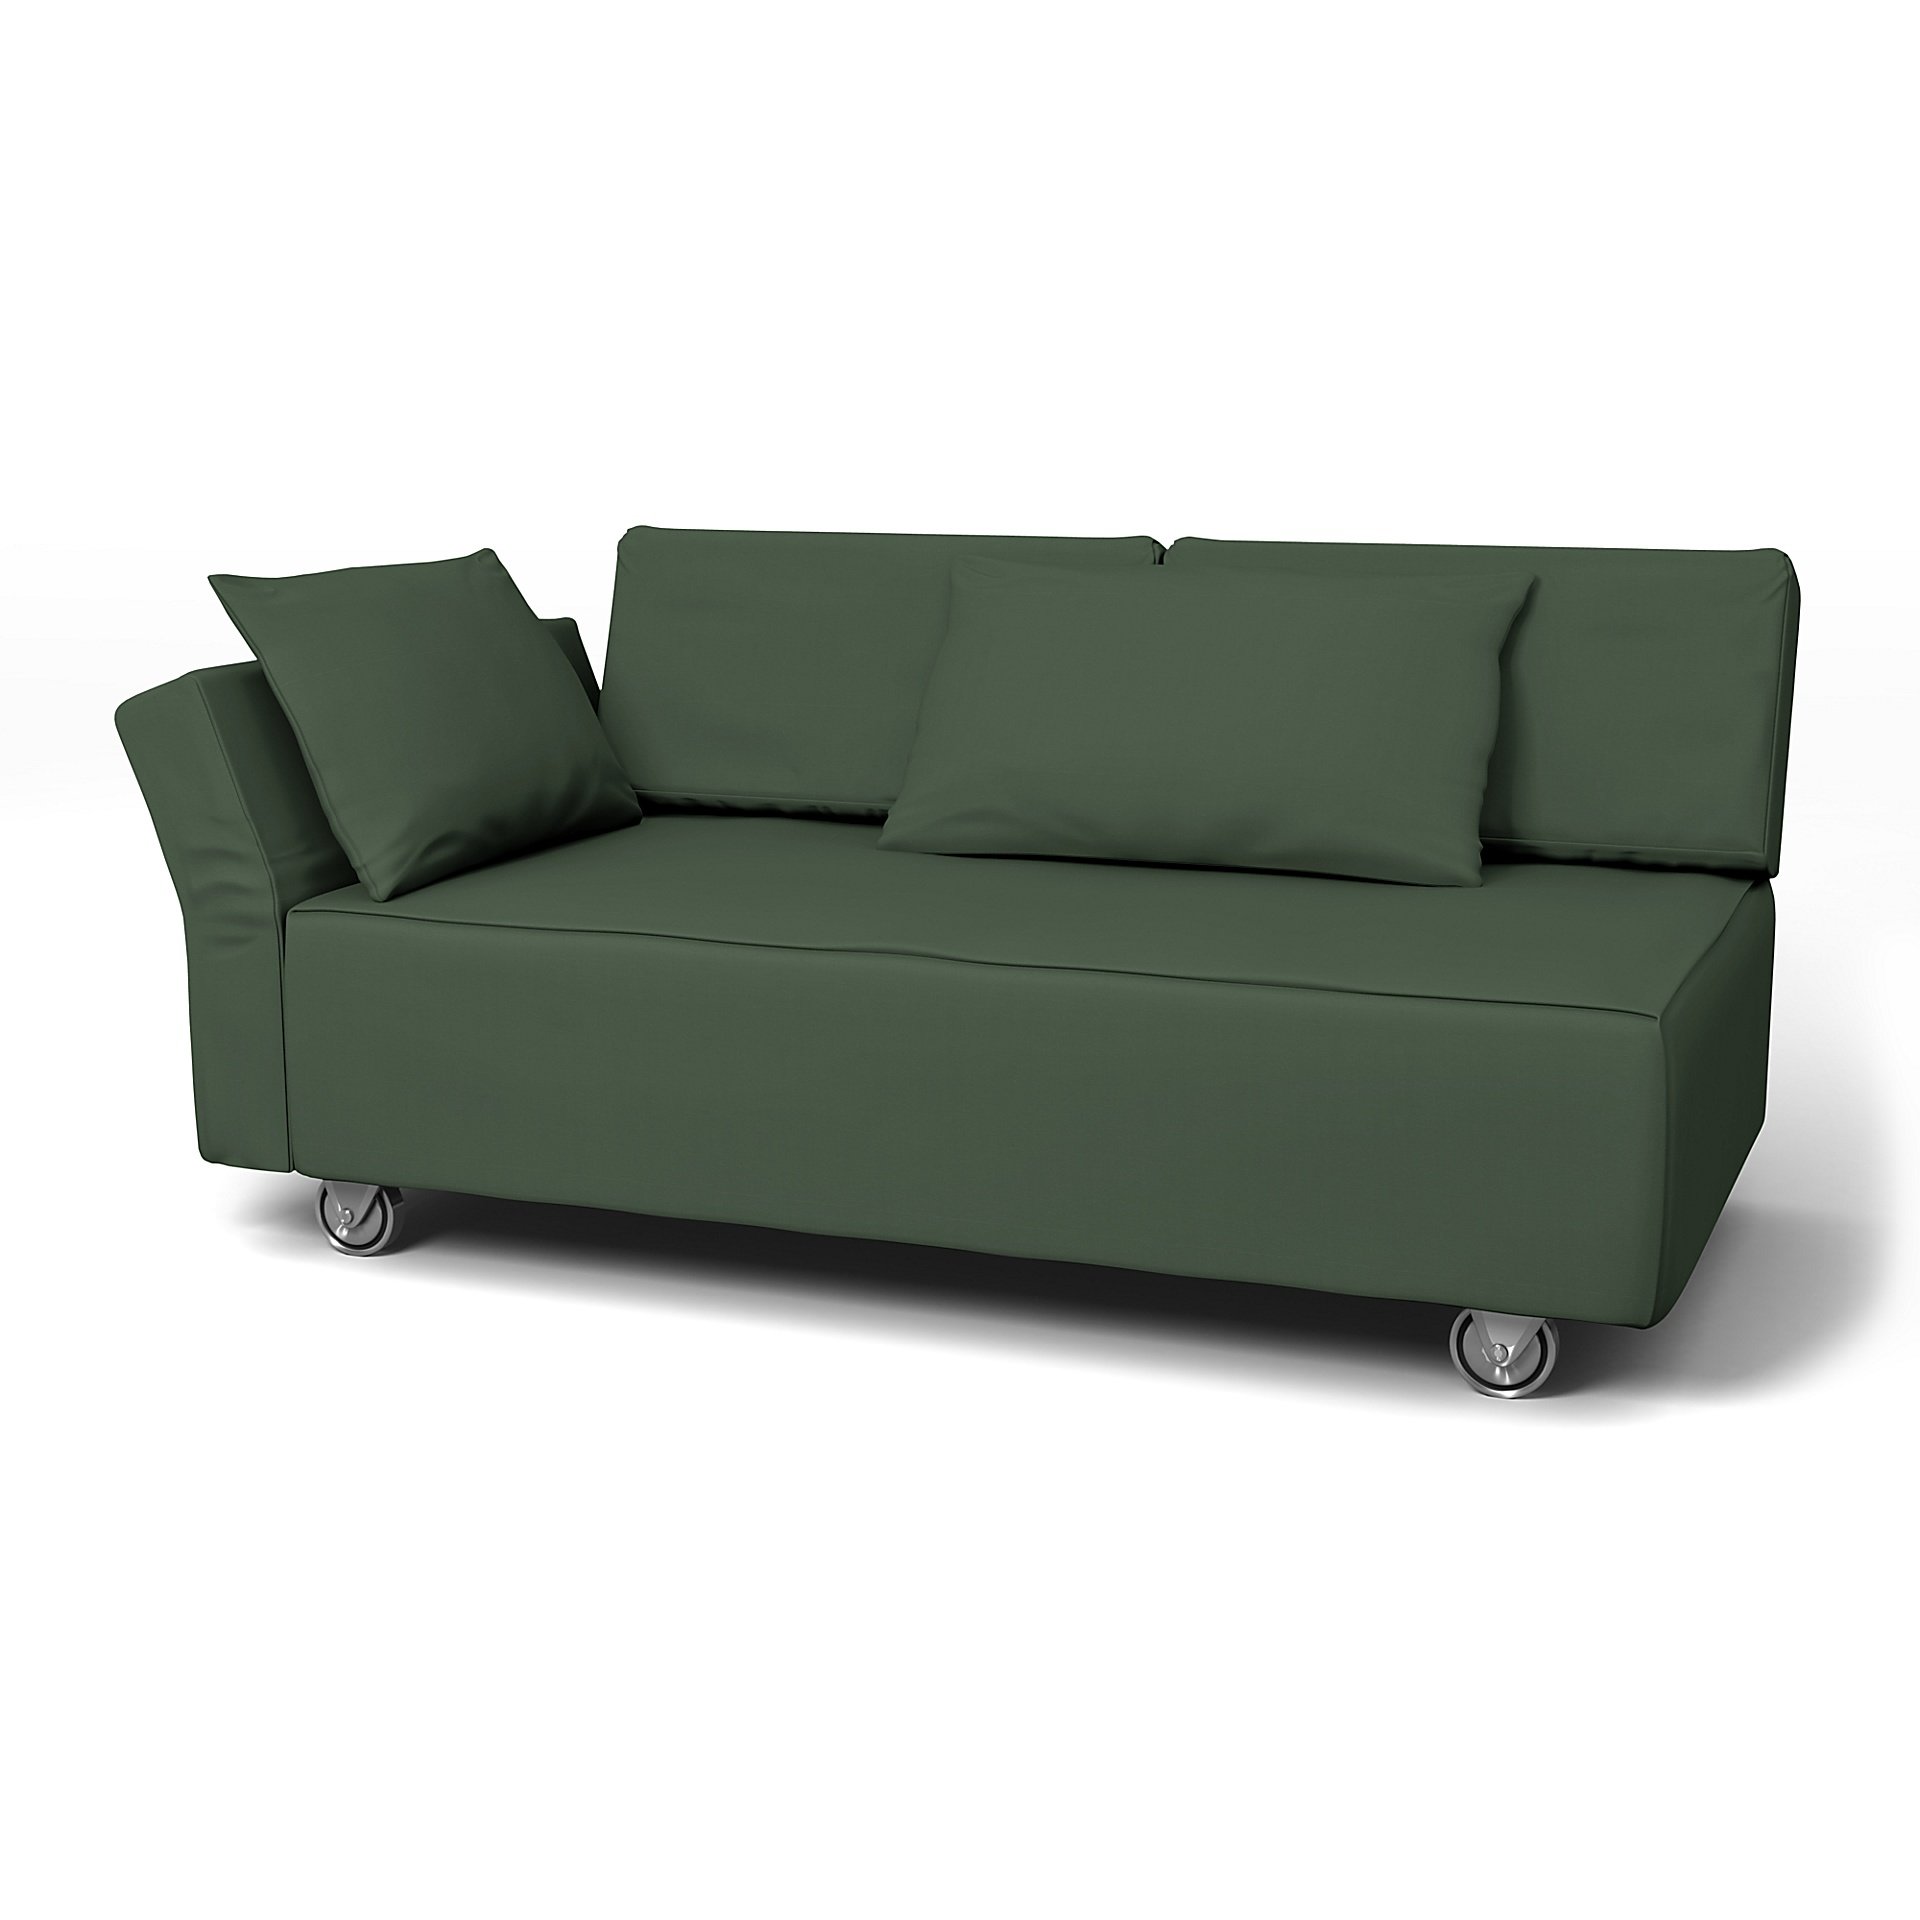 IKEA - Falsterbo 2 Seat Sofa with Left Arm Cover, Thyme, Cotton - Bemz